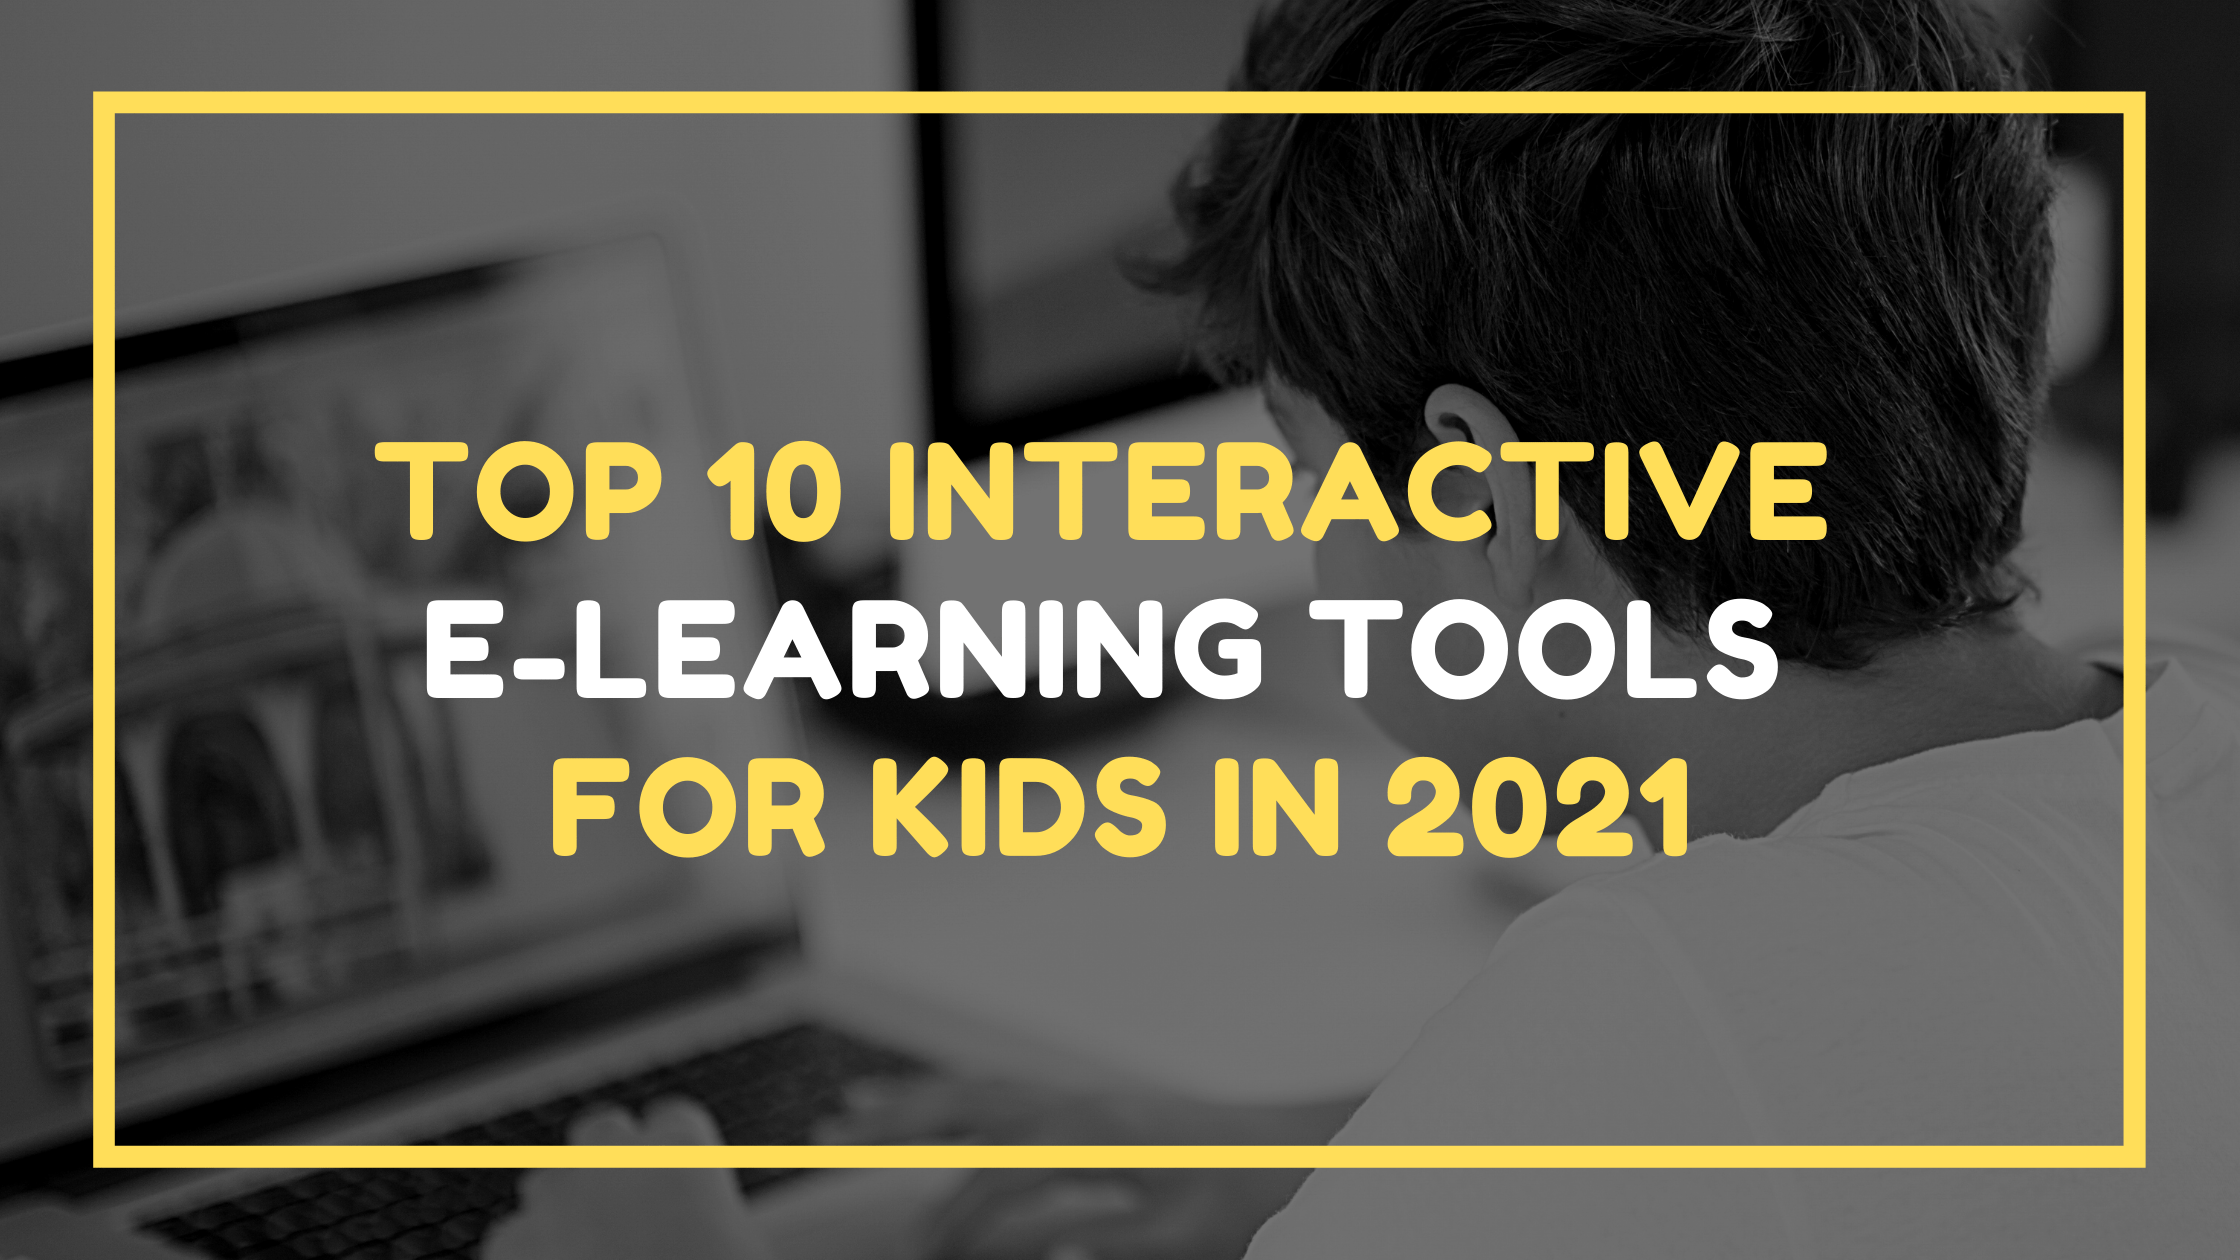 Top 10 interactive learning tools for kids in 2021